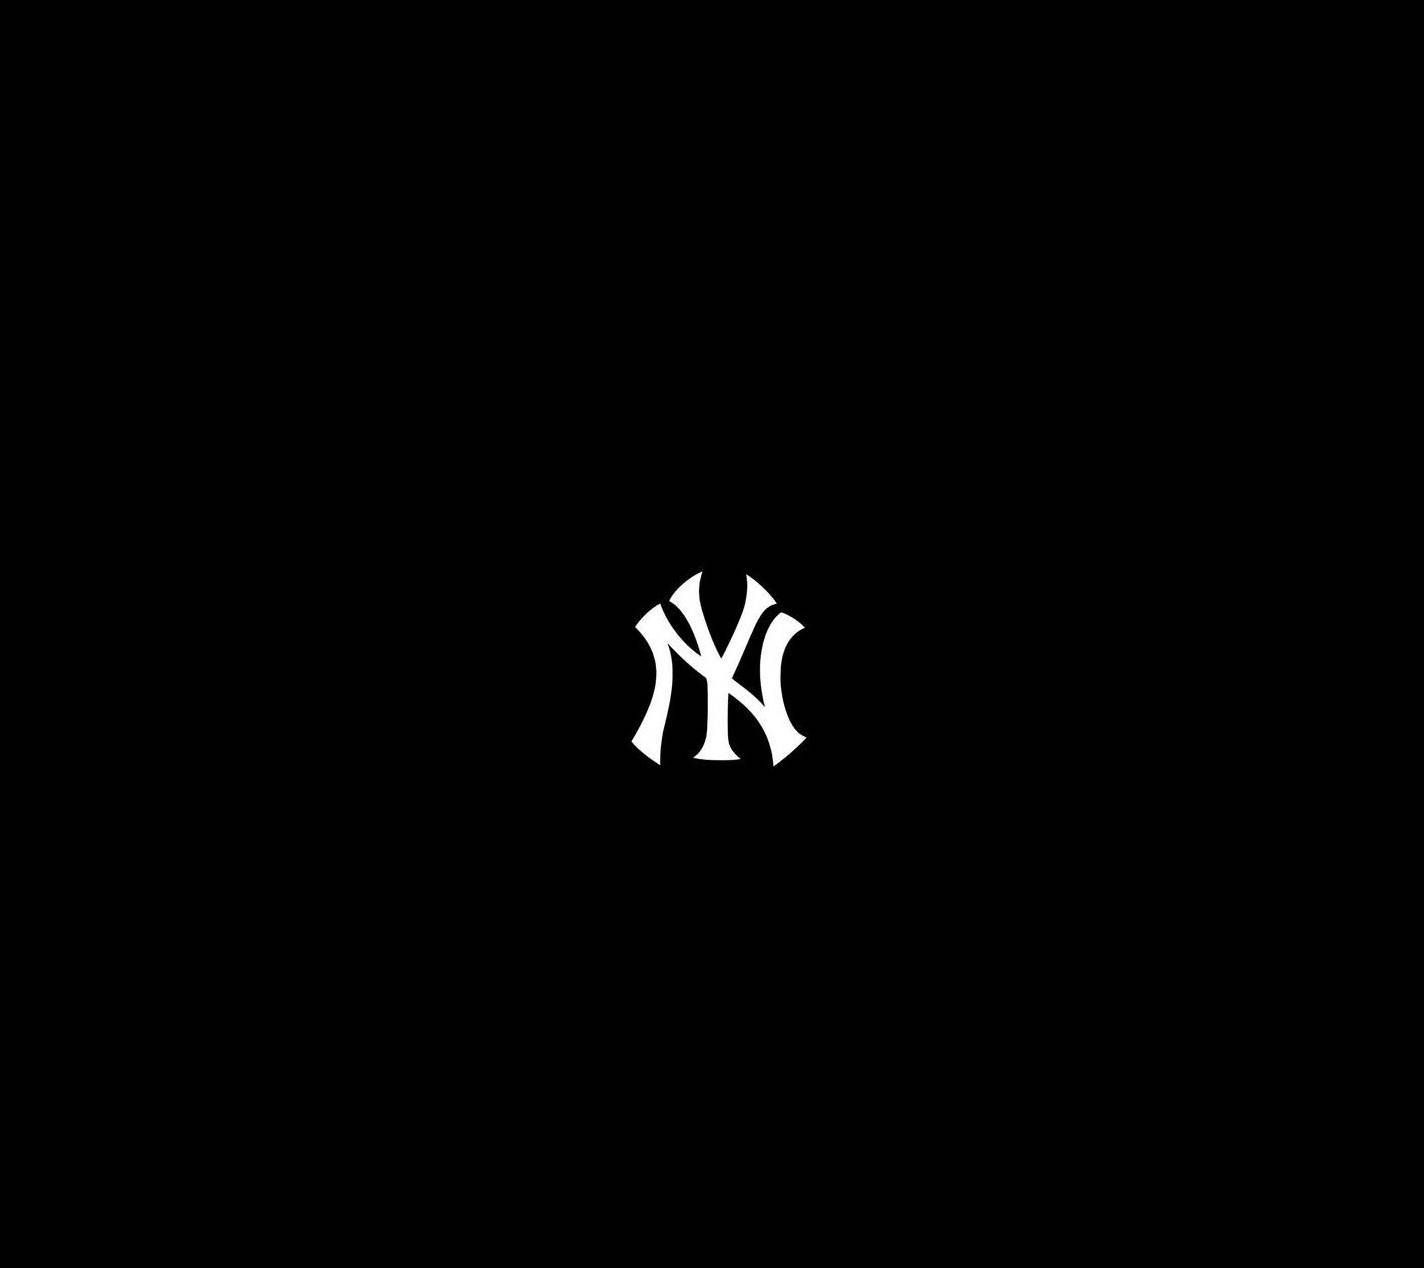 New York Yankees wallpaper by Crooklynite  Download on ZEDGE  a0aa